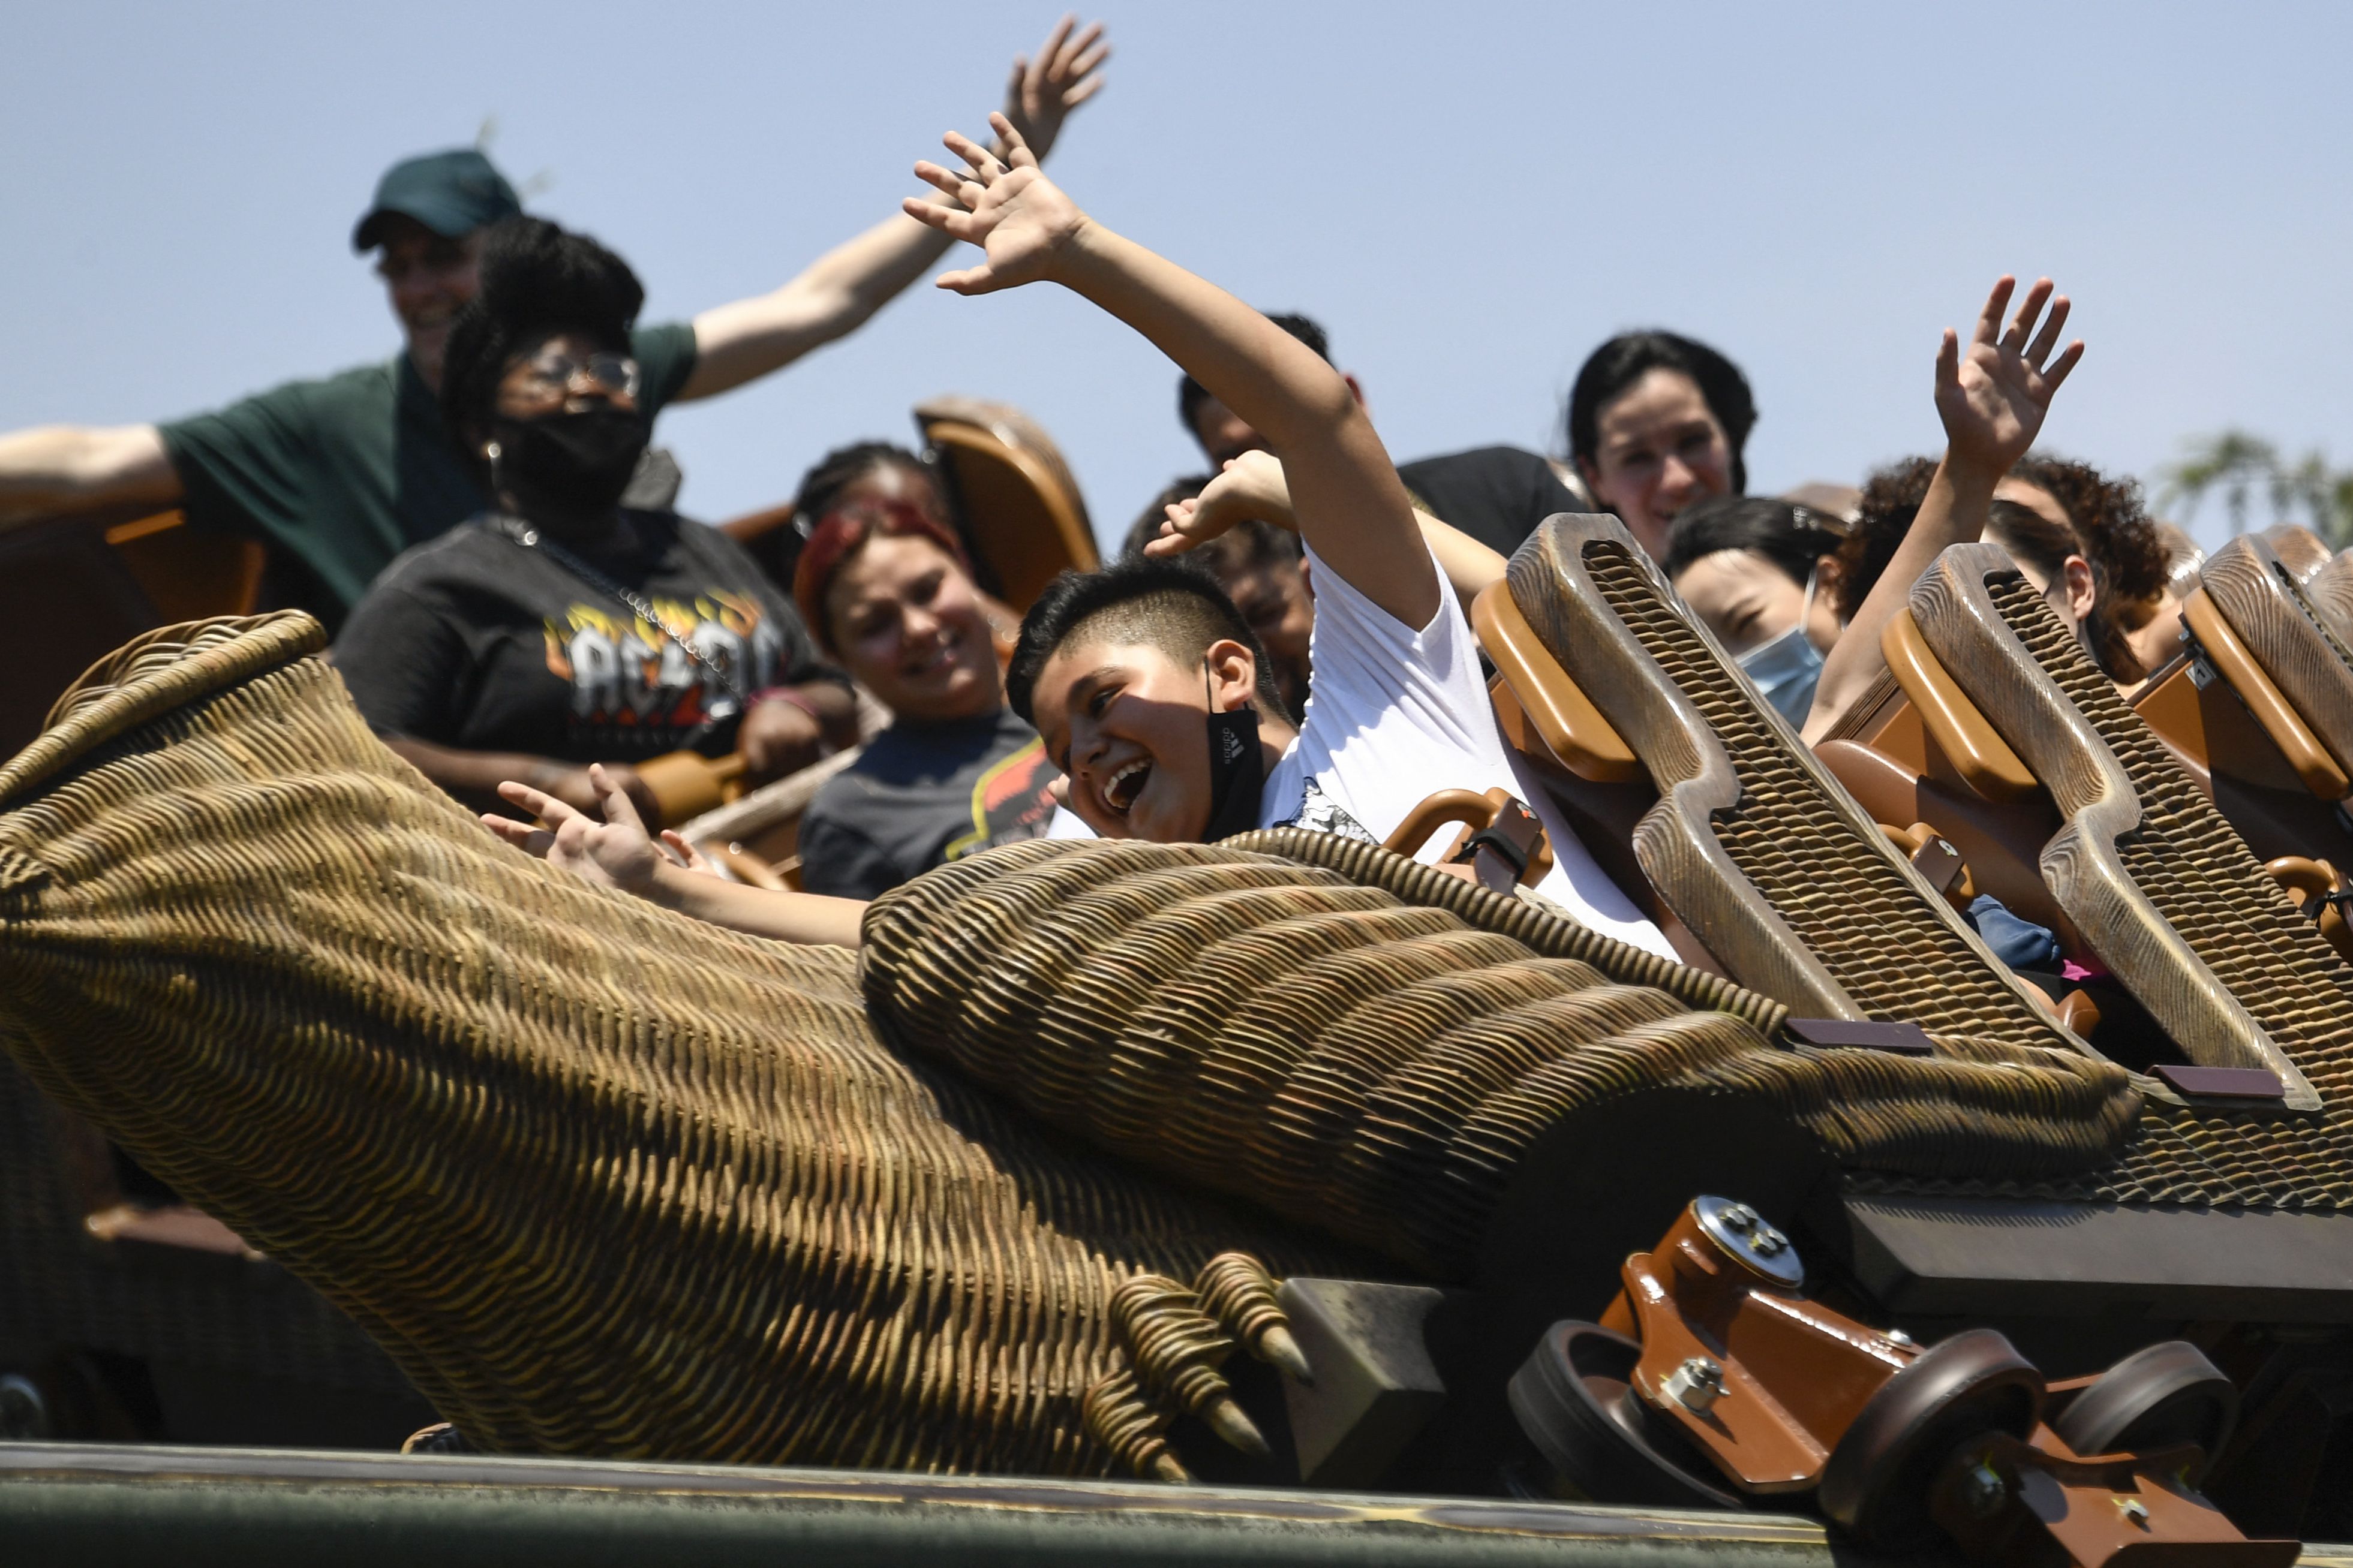 Guests ride the Flight of the Hippogriff roller coaster inside The Wizarding World of Harry Potter at the Universal Studios Hollywood theme park following the state's full reopening on June 15